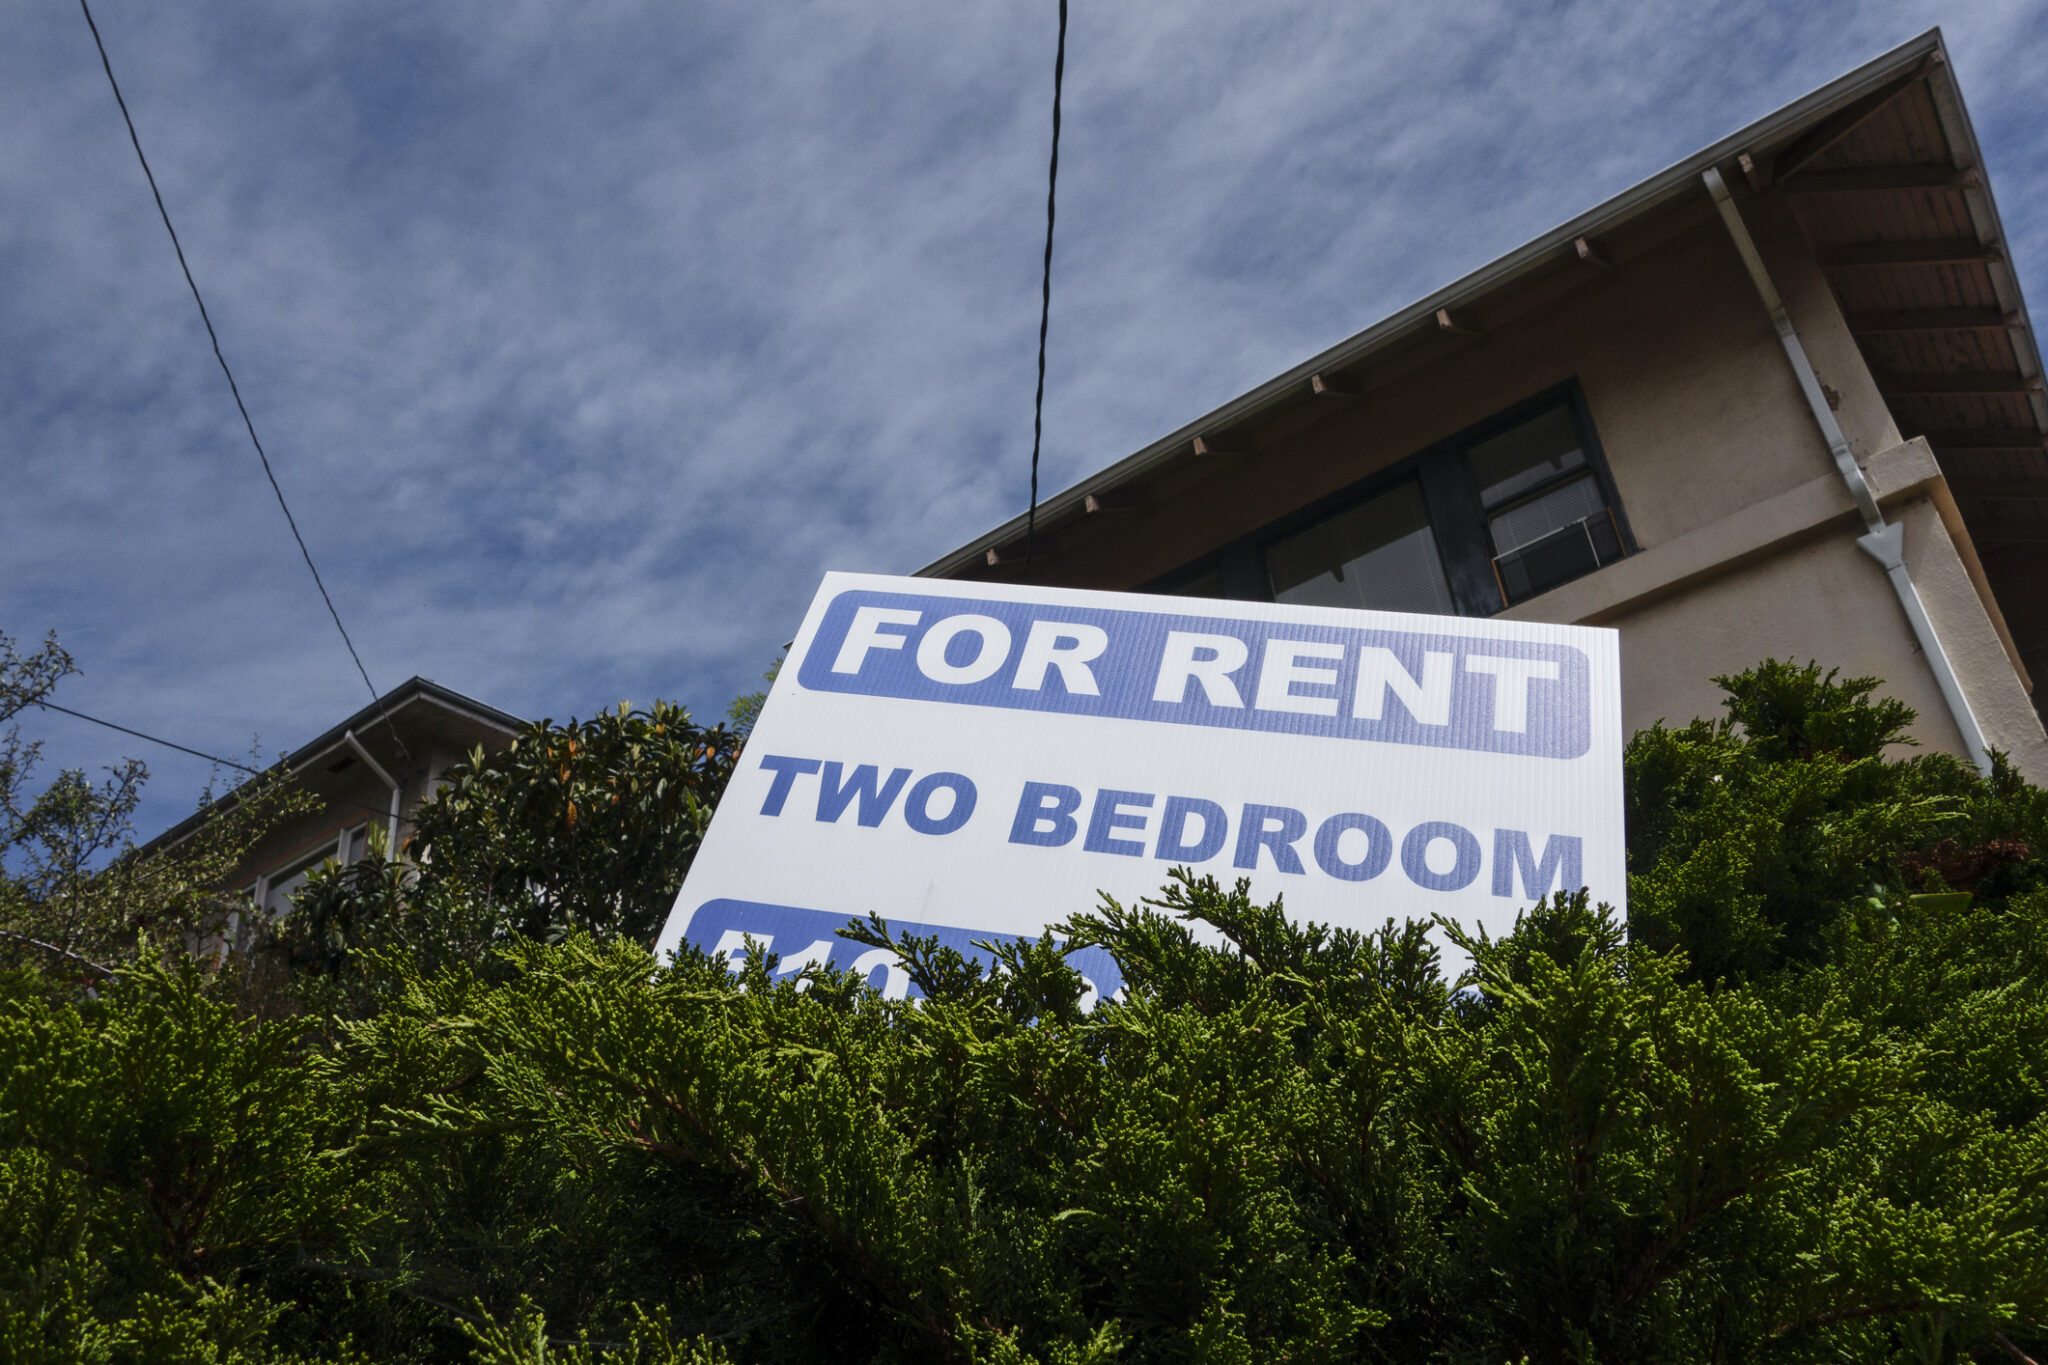 Idaho renters face bigger shortage of affordable homes, national housing report shows